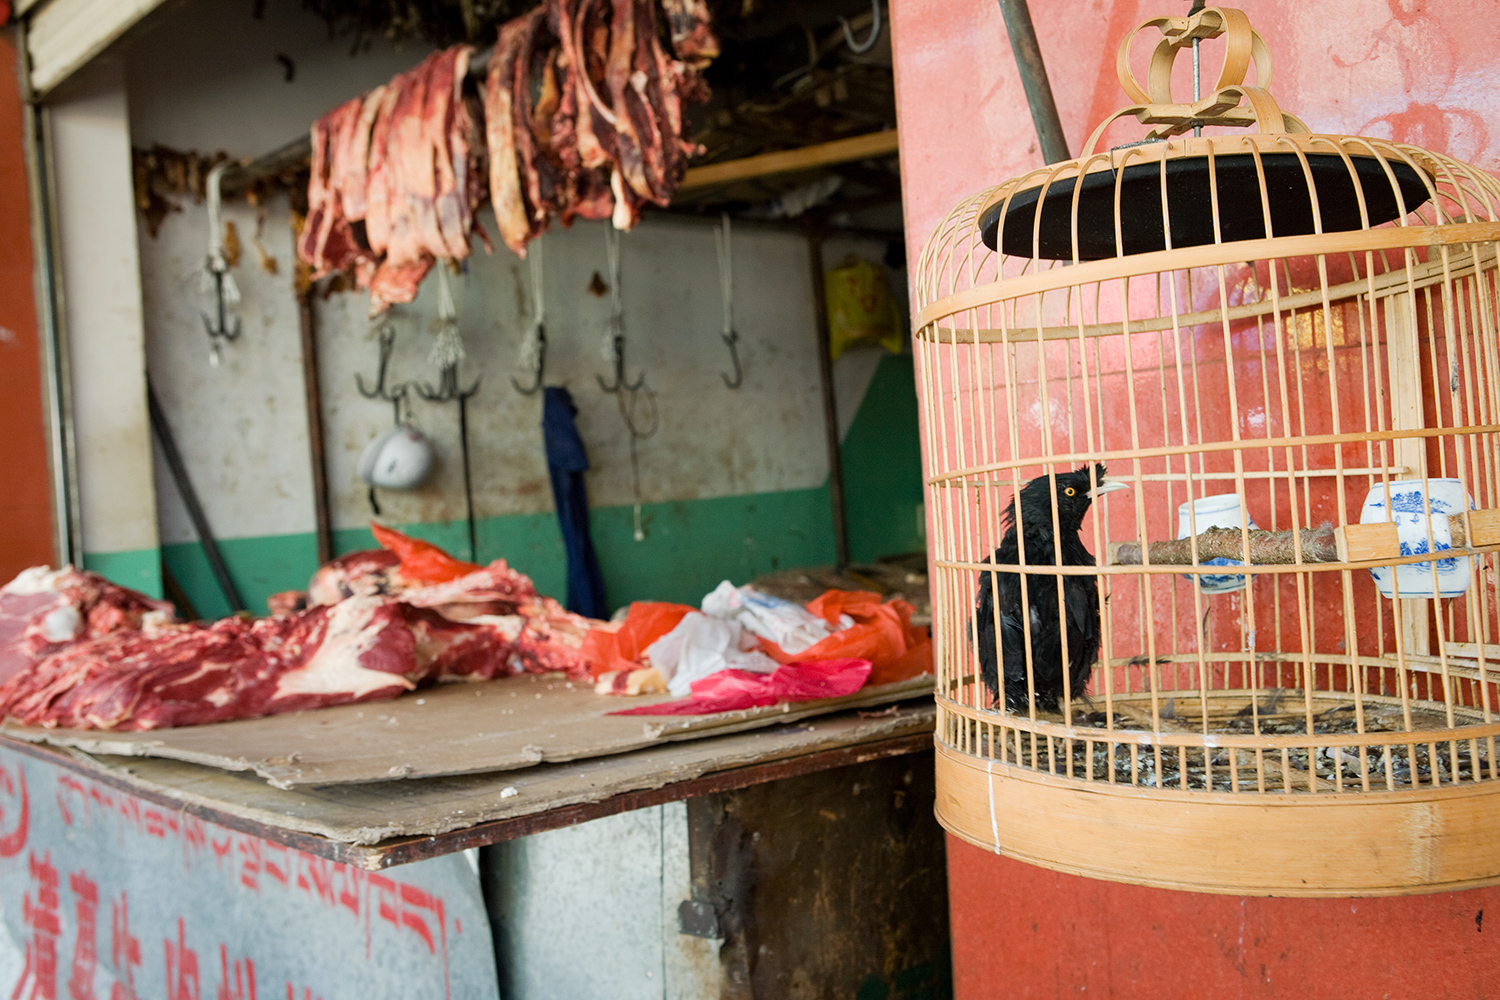  A butcher shop sells yak meat in the open air, Lhasa. 